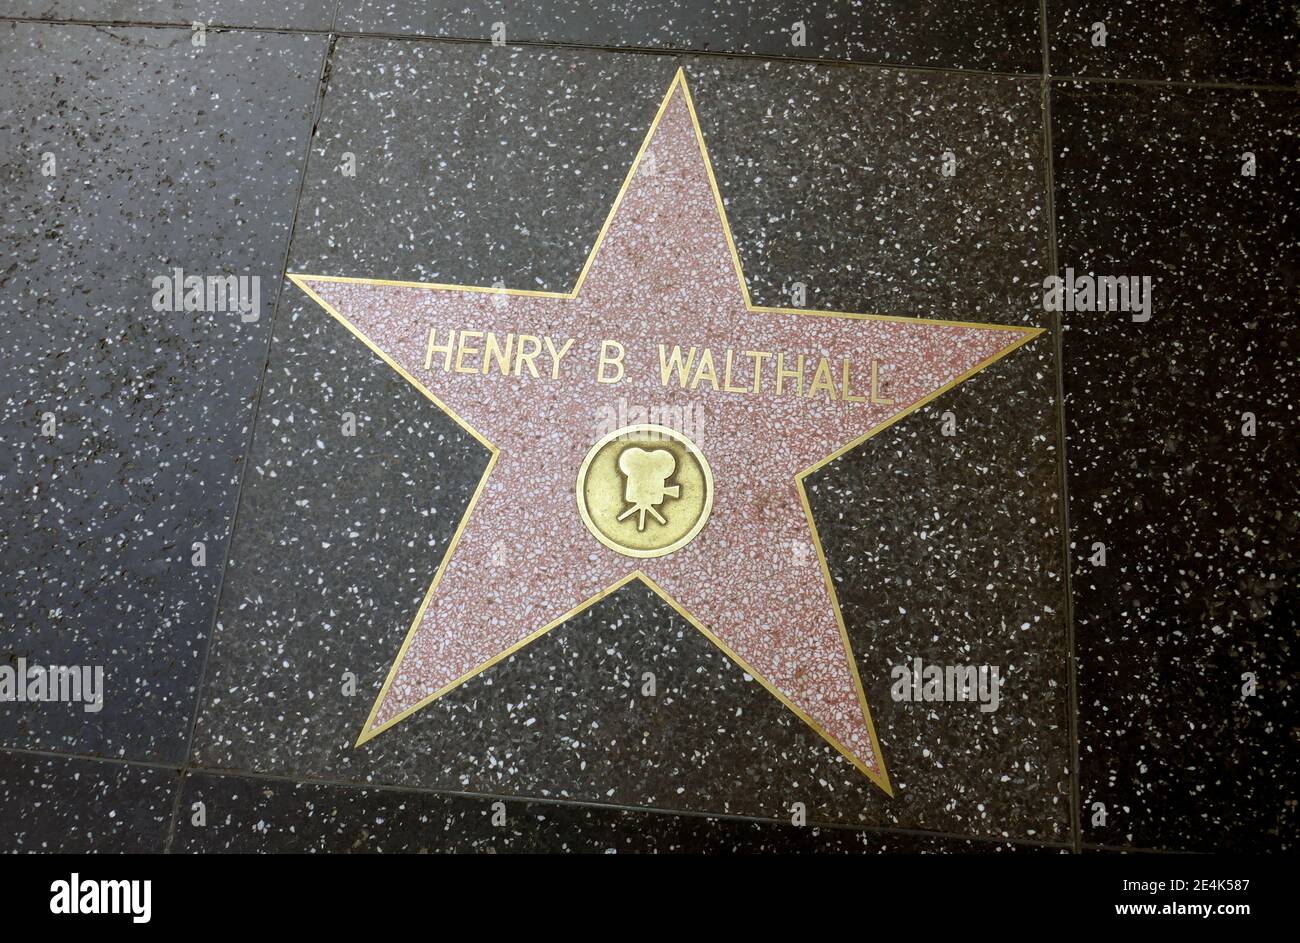 Los Angeles, California, USA 20th January 2021 A general view of atmosphere of actor Henry B. Walthall Star on Walk of Fame during Coronavirus Covid-19 Pandemic on January 20, 2021 in Los Angeles, California, USA. Photo by Barry King/Alamy Stock Photo Stock Photo